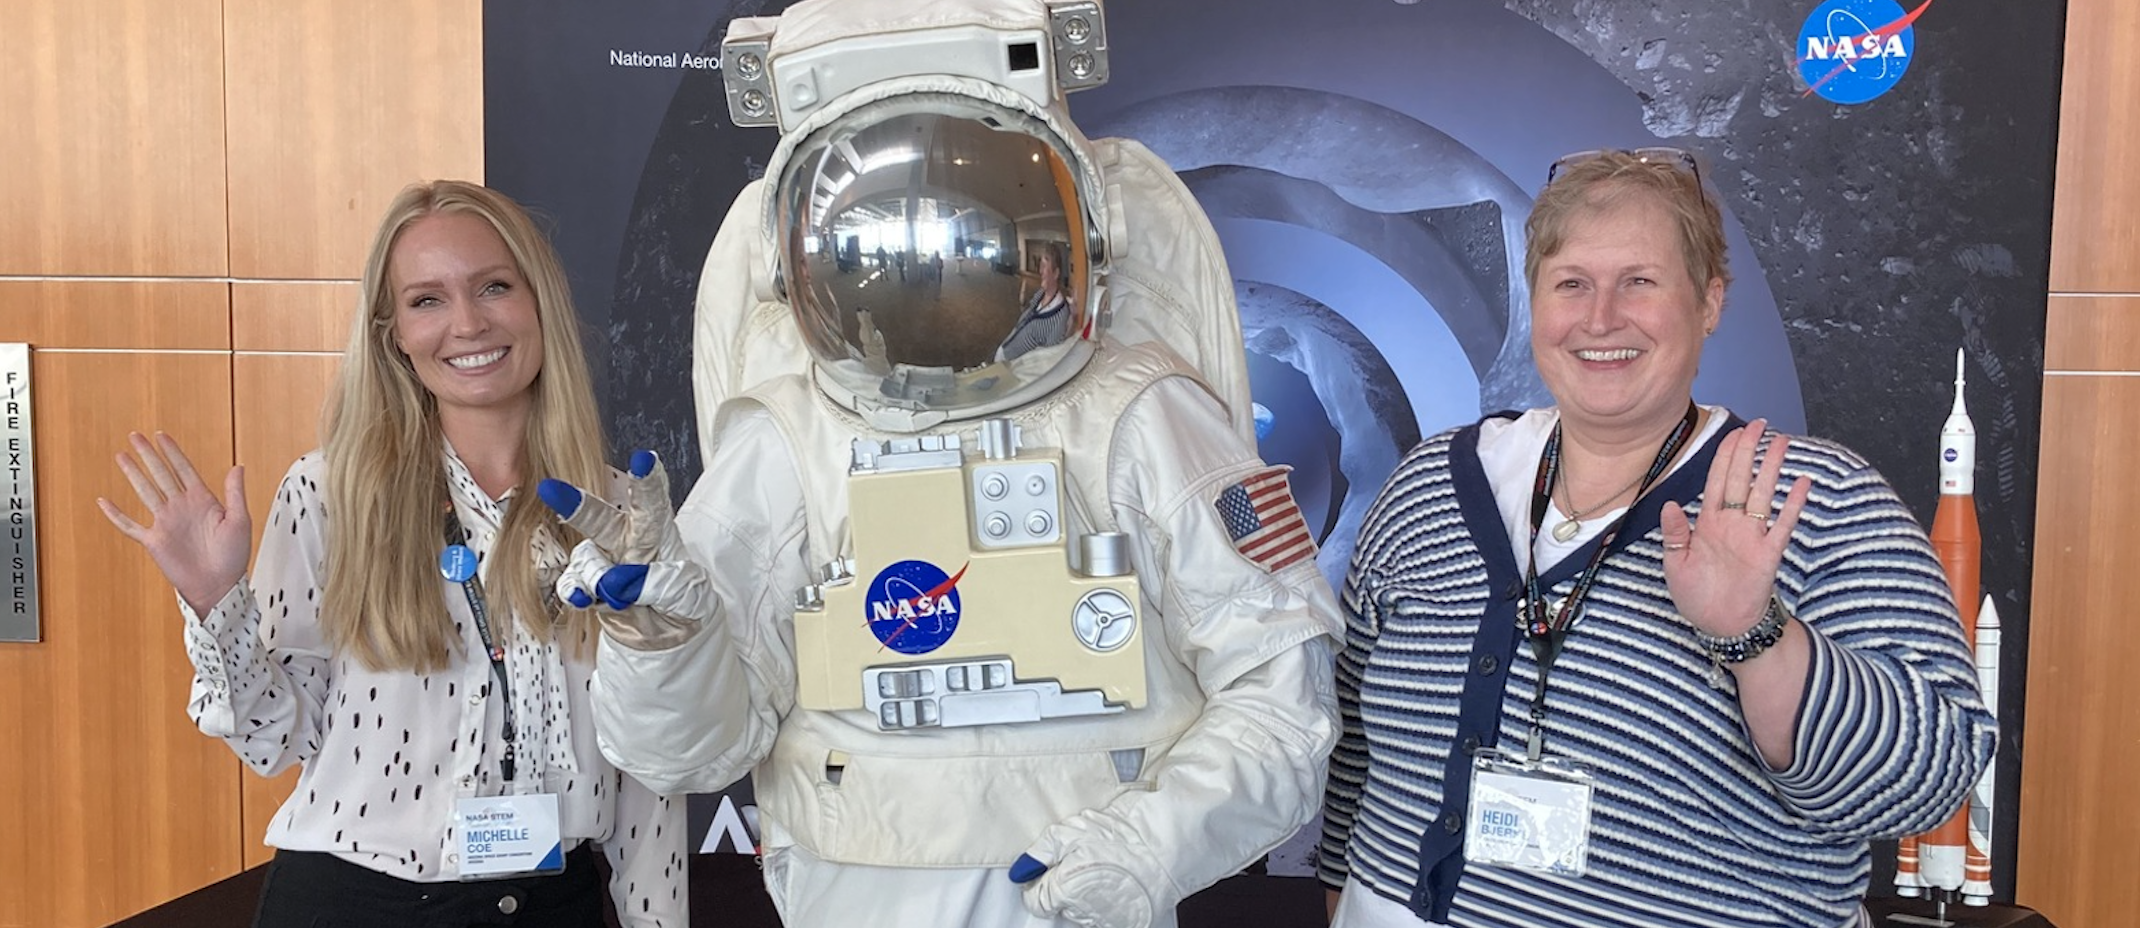 Michelle Coe (left) and Heidi Burke (right) next to NASA astronaut at the NASA OSTEM Better Together Conference 2022.